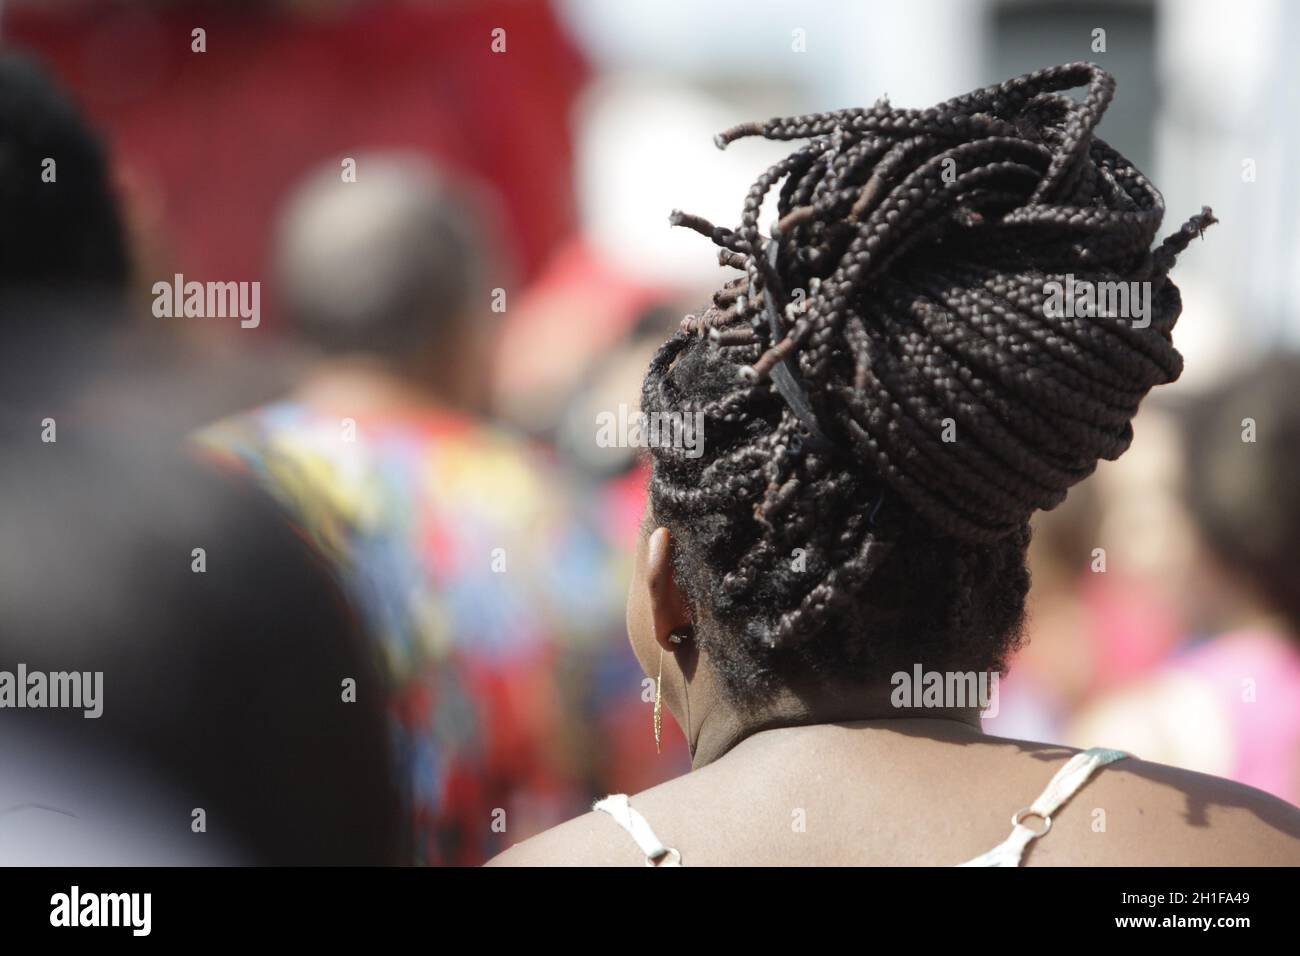 salvador, bahia / brazil - february 4, 2015: Catholics and Candomble supporters revere Santa Barbara - Iansa in syncretism - The party takes place at Stock Photo